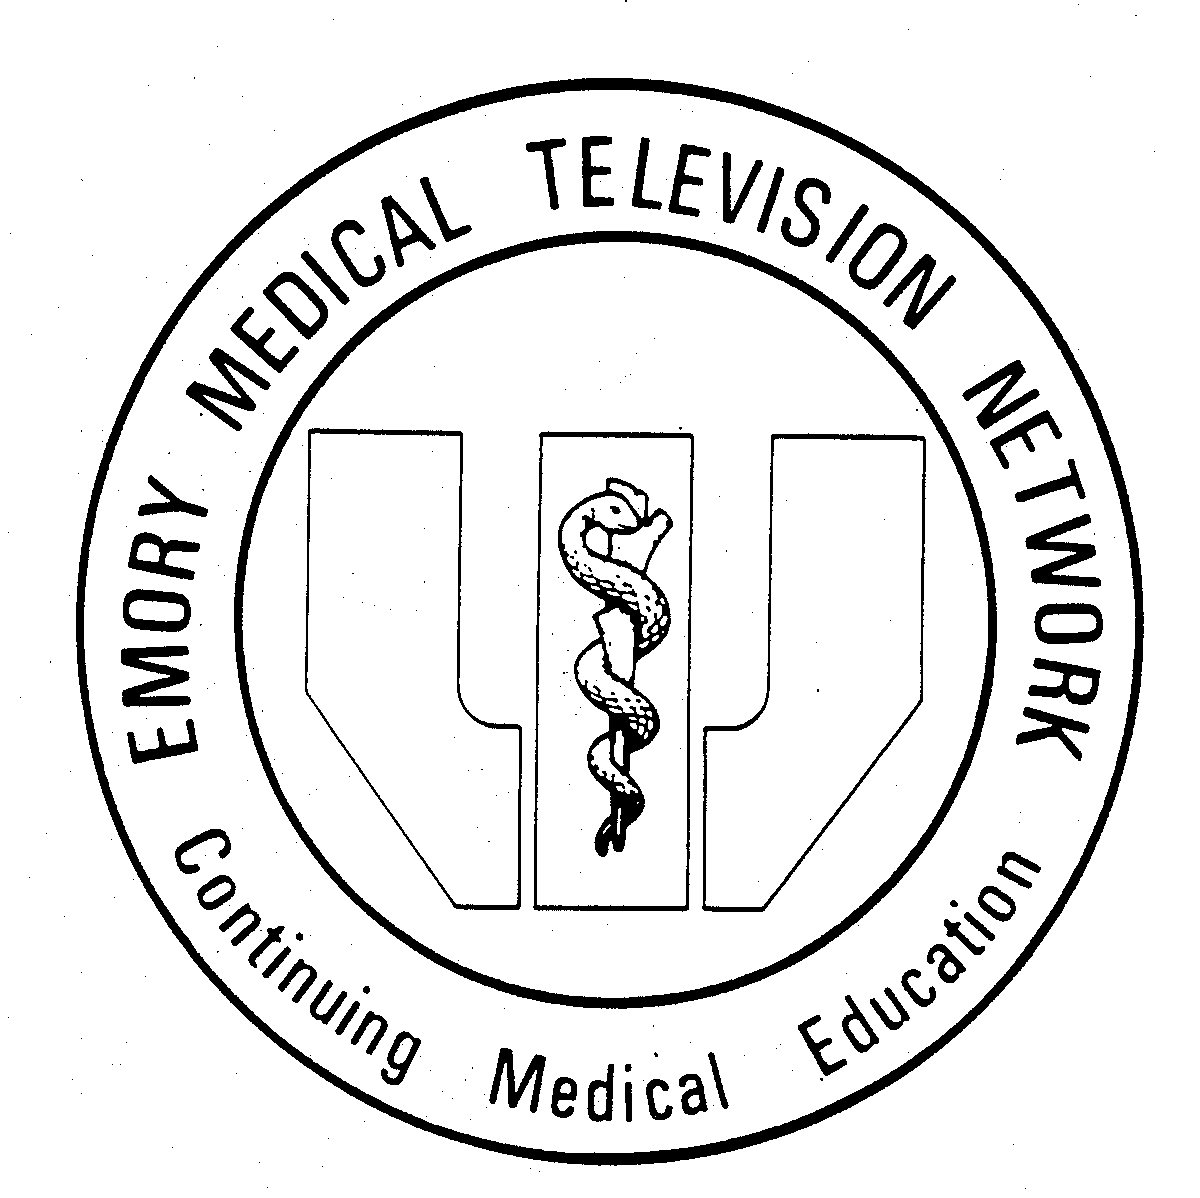  EMORY MEDICAL TELEVISION NETWORK CONTINUING MEDICAL EDUCATION